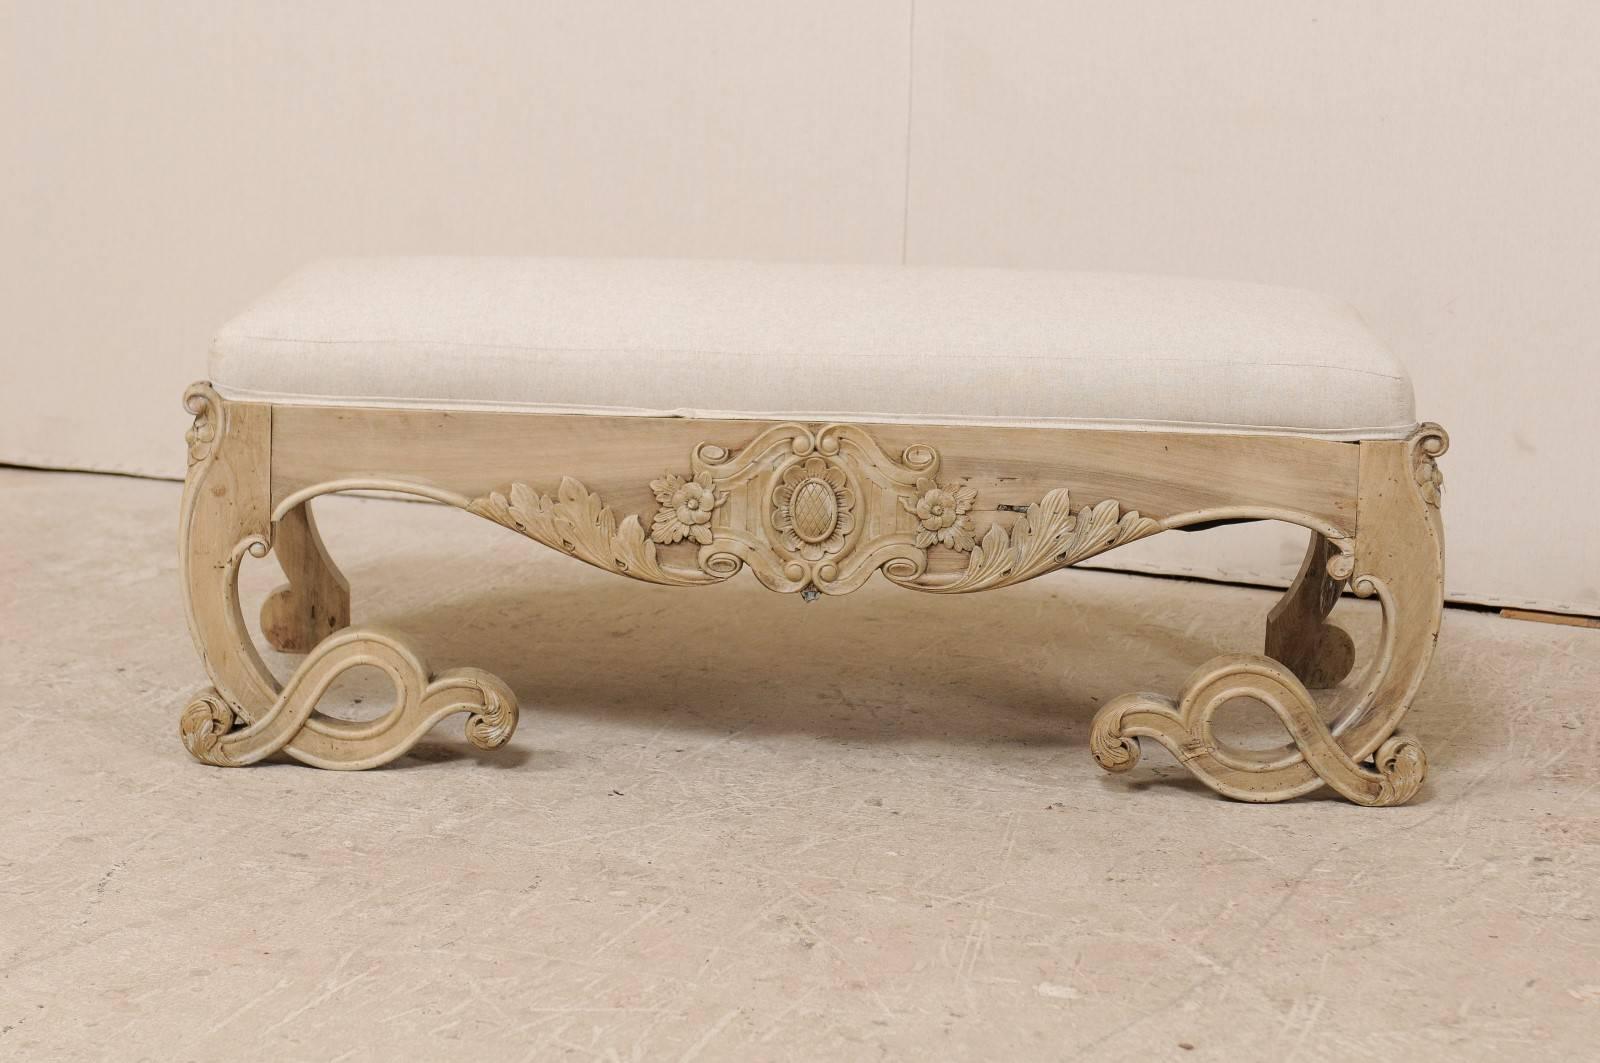 A Swedish carved wood and upholstered bench. This ornate Swedish wood bench from the early 20th century has an ornately carved skirt and legs with upholstered seat. The skirt features a scalloped front with central floral motif. The legs appear to